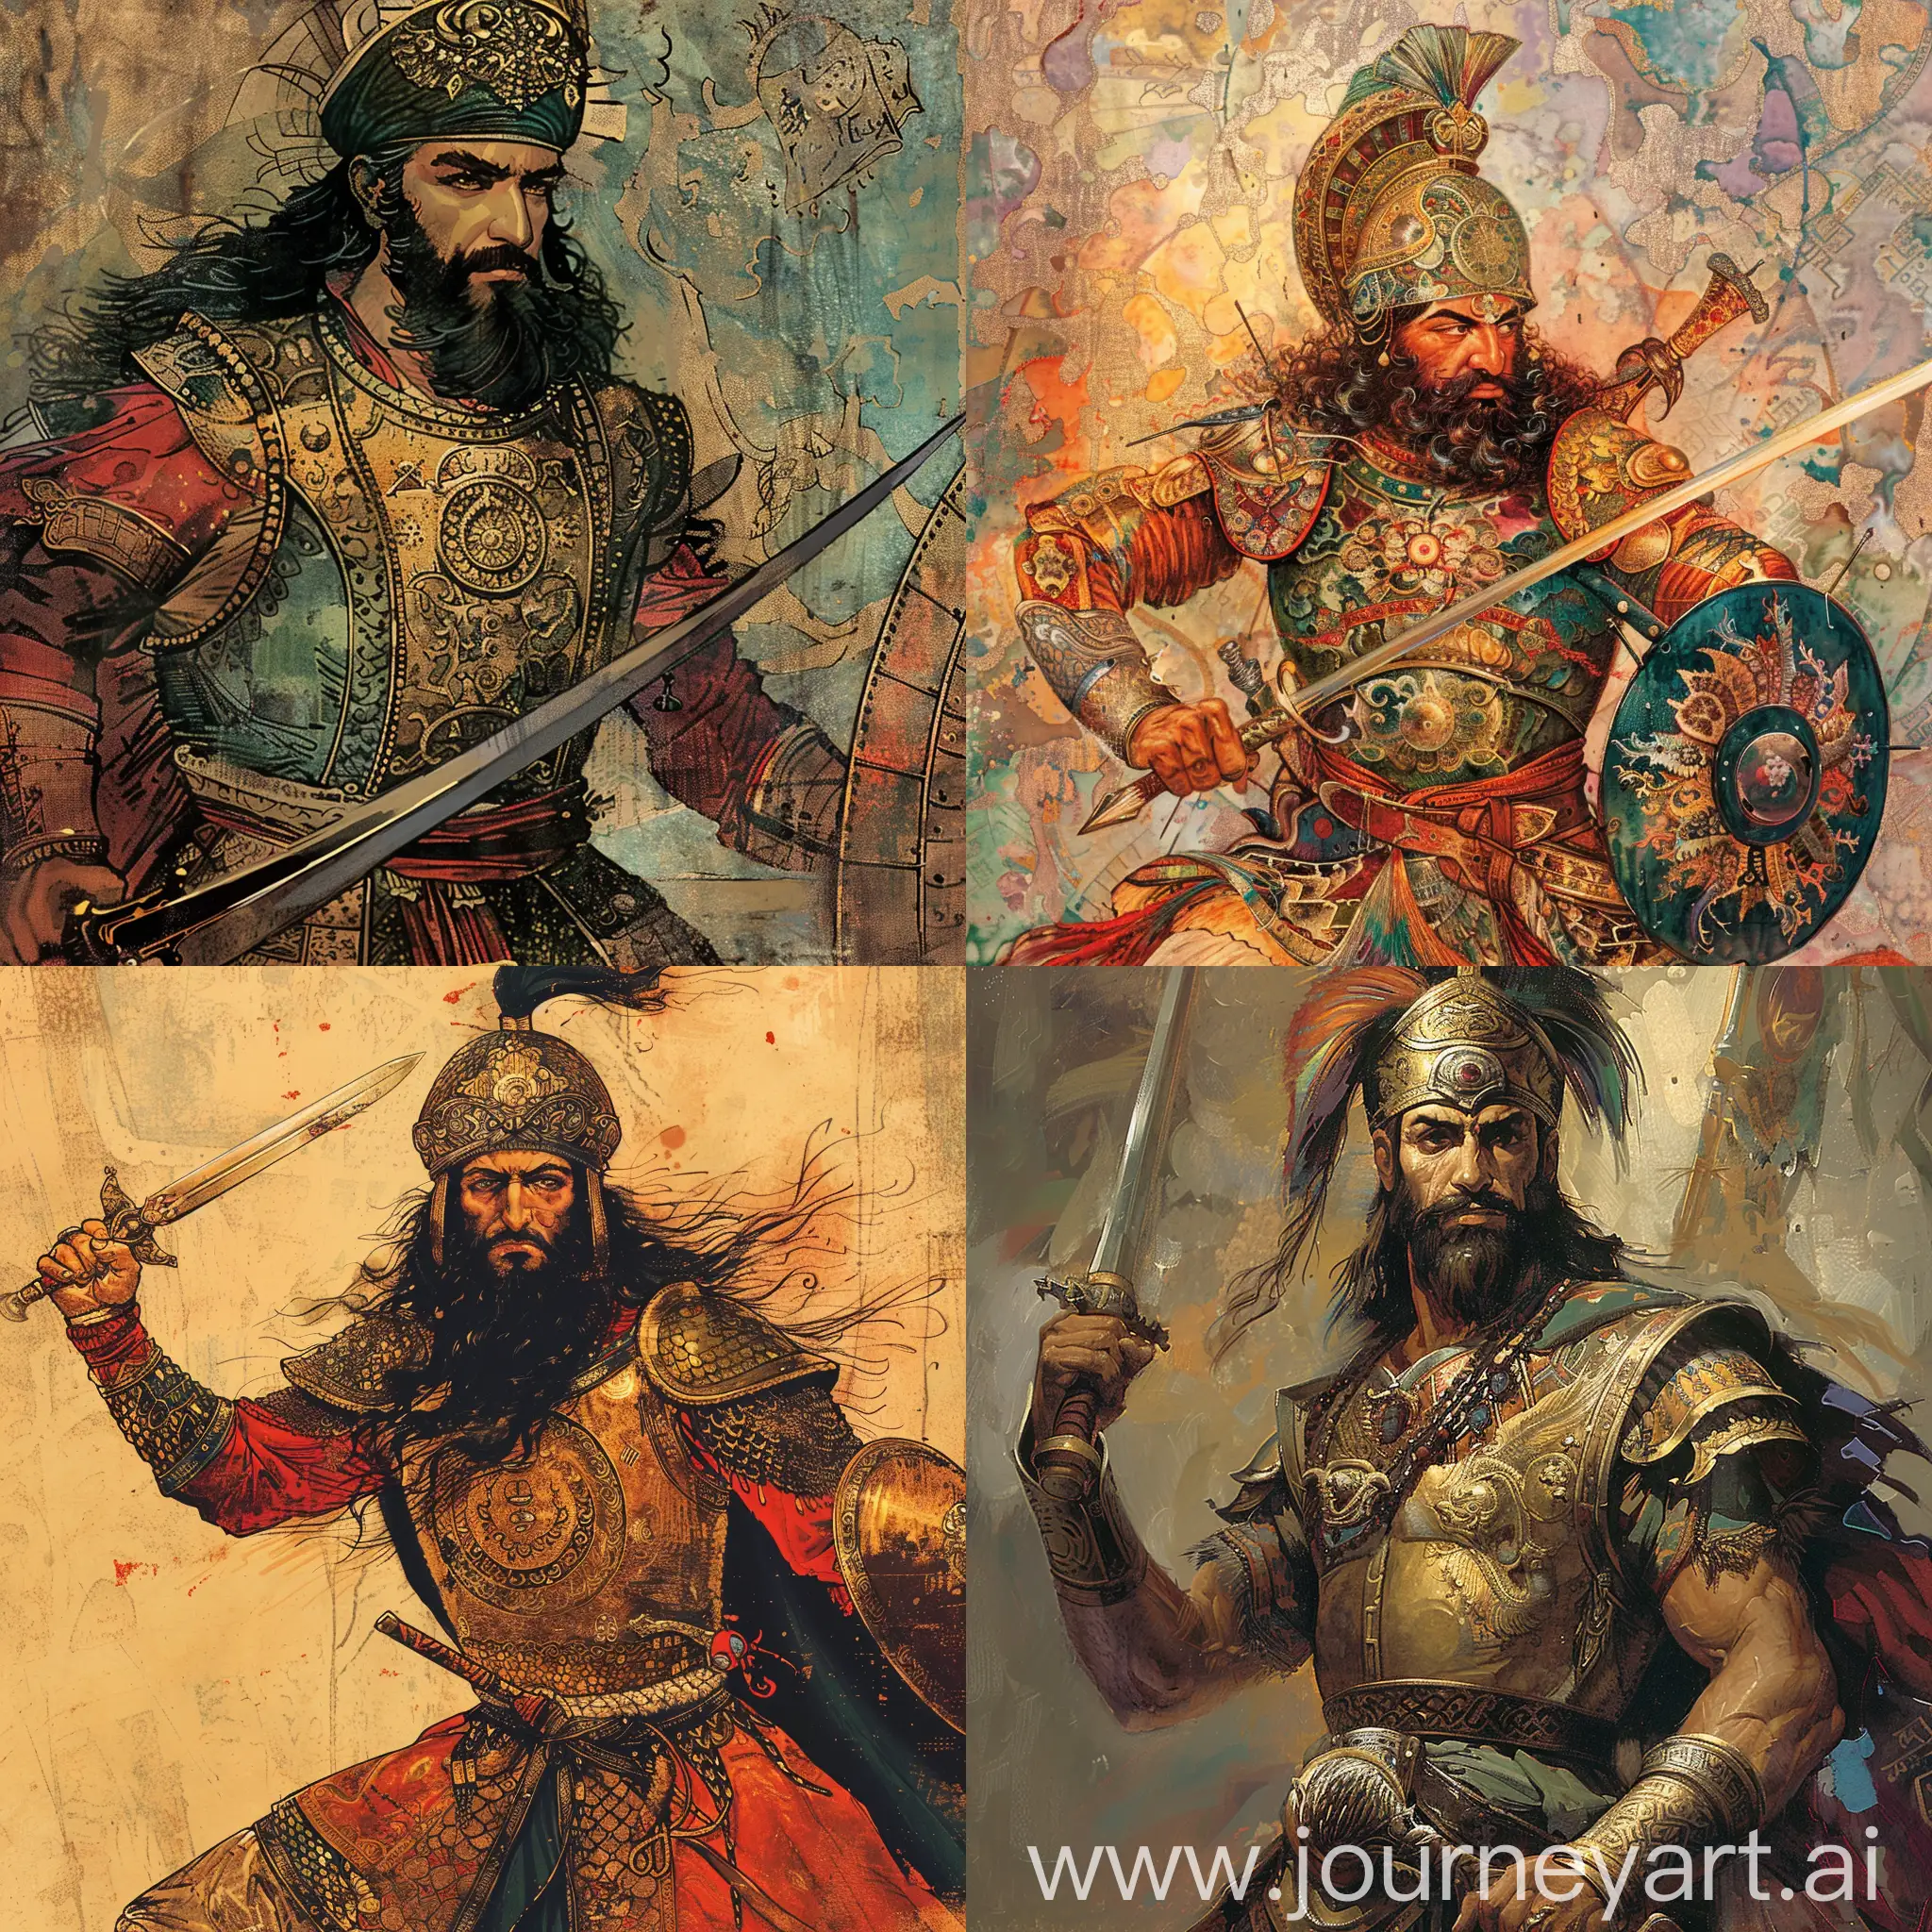 Take a full shot of the Iranian warrior Rostam in the stories of the Shahnameh for me